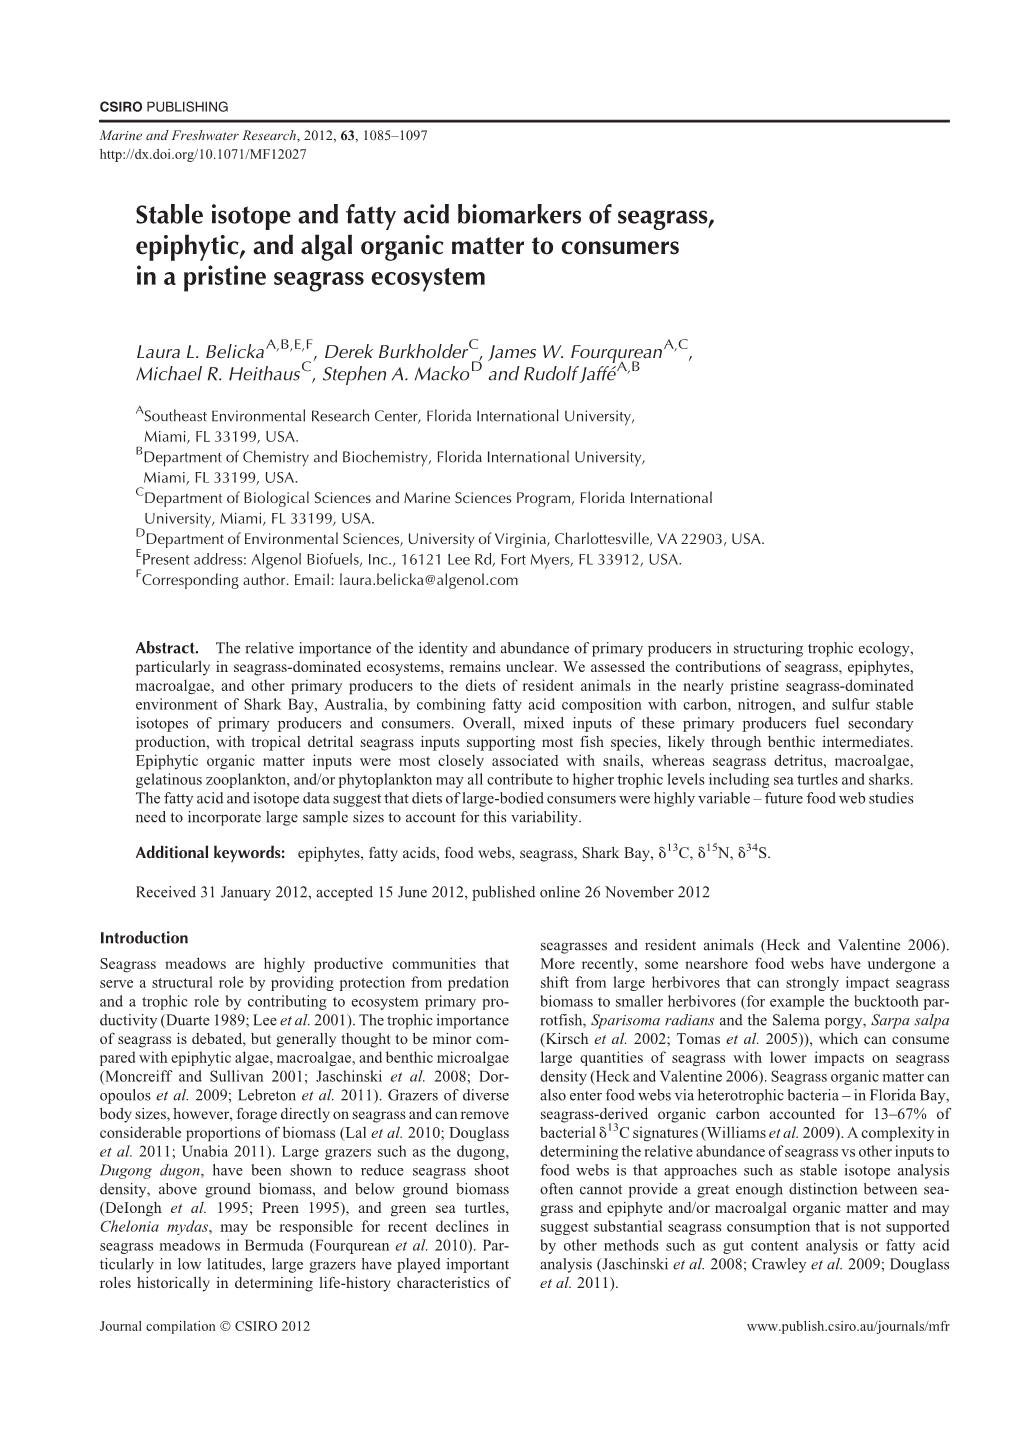 Stable Isotope and Fatty Acid Biomarkers of Seagrass, Epiphytic, and Algal Organic Matter to Consumers in a Pristine Seagrass Ecosystem